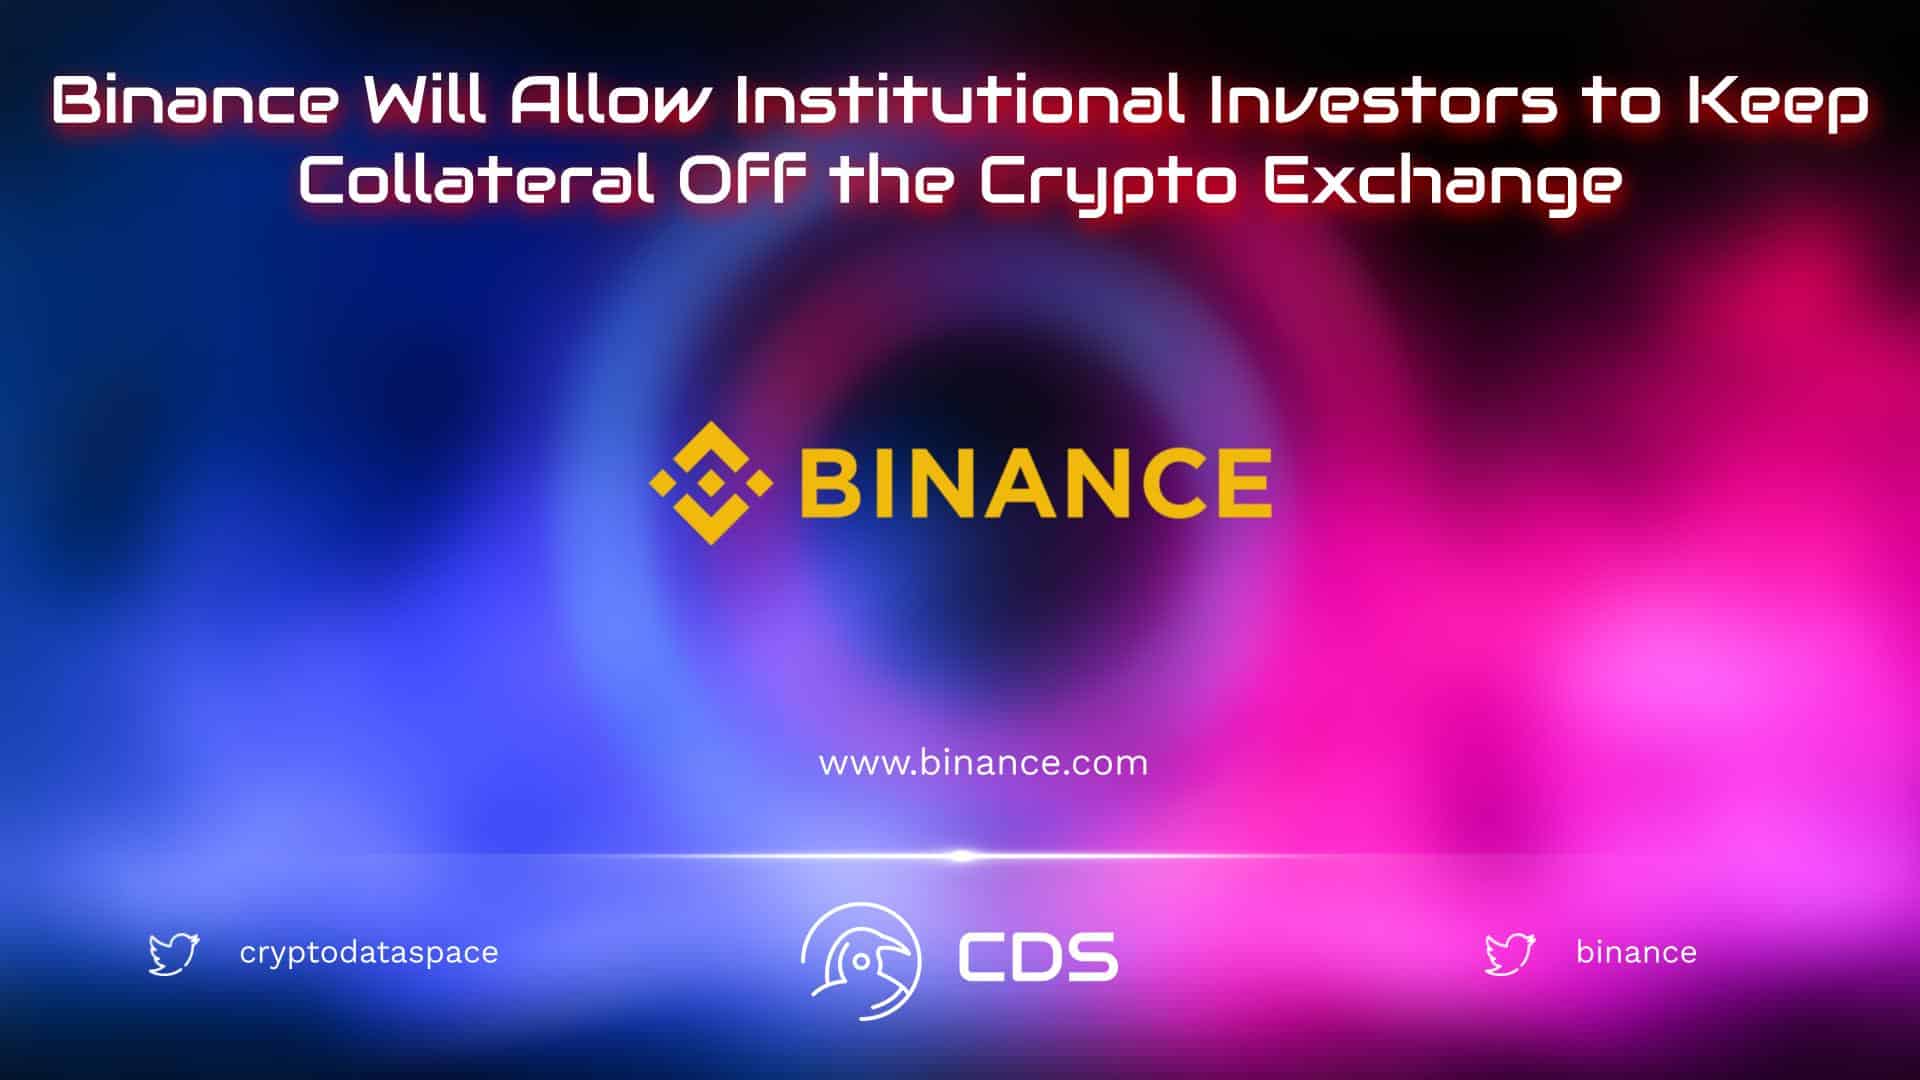 Binance Will Allow Institutional Investors to Keep Collateral Off the Crypto Exchange